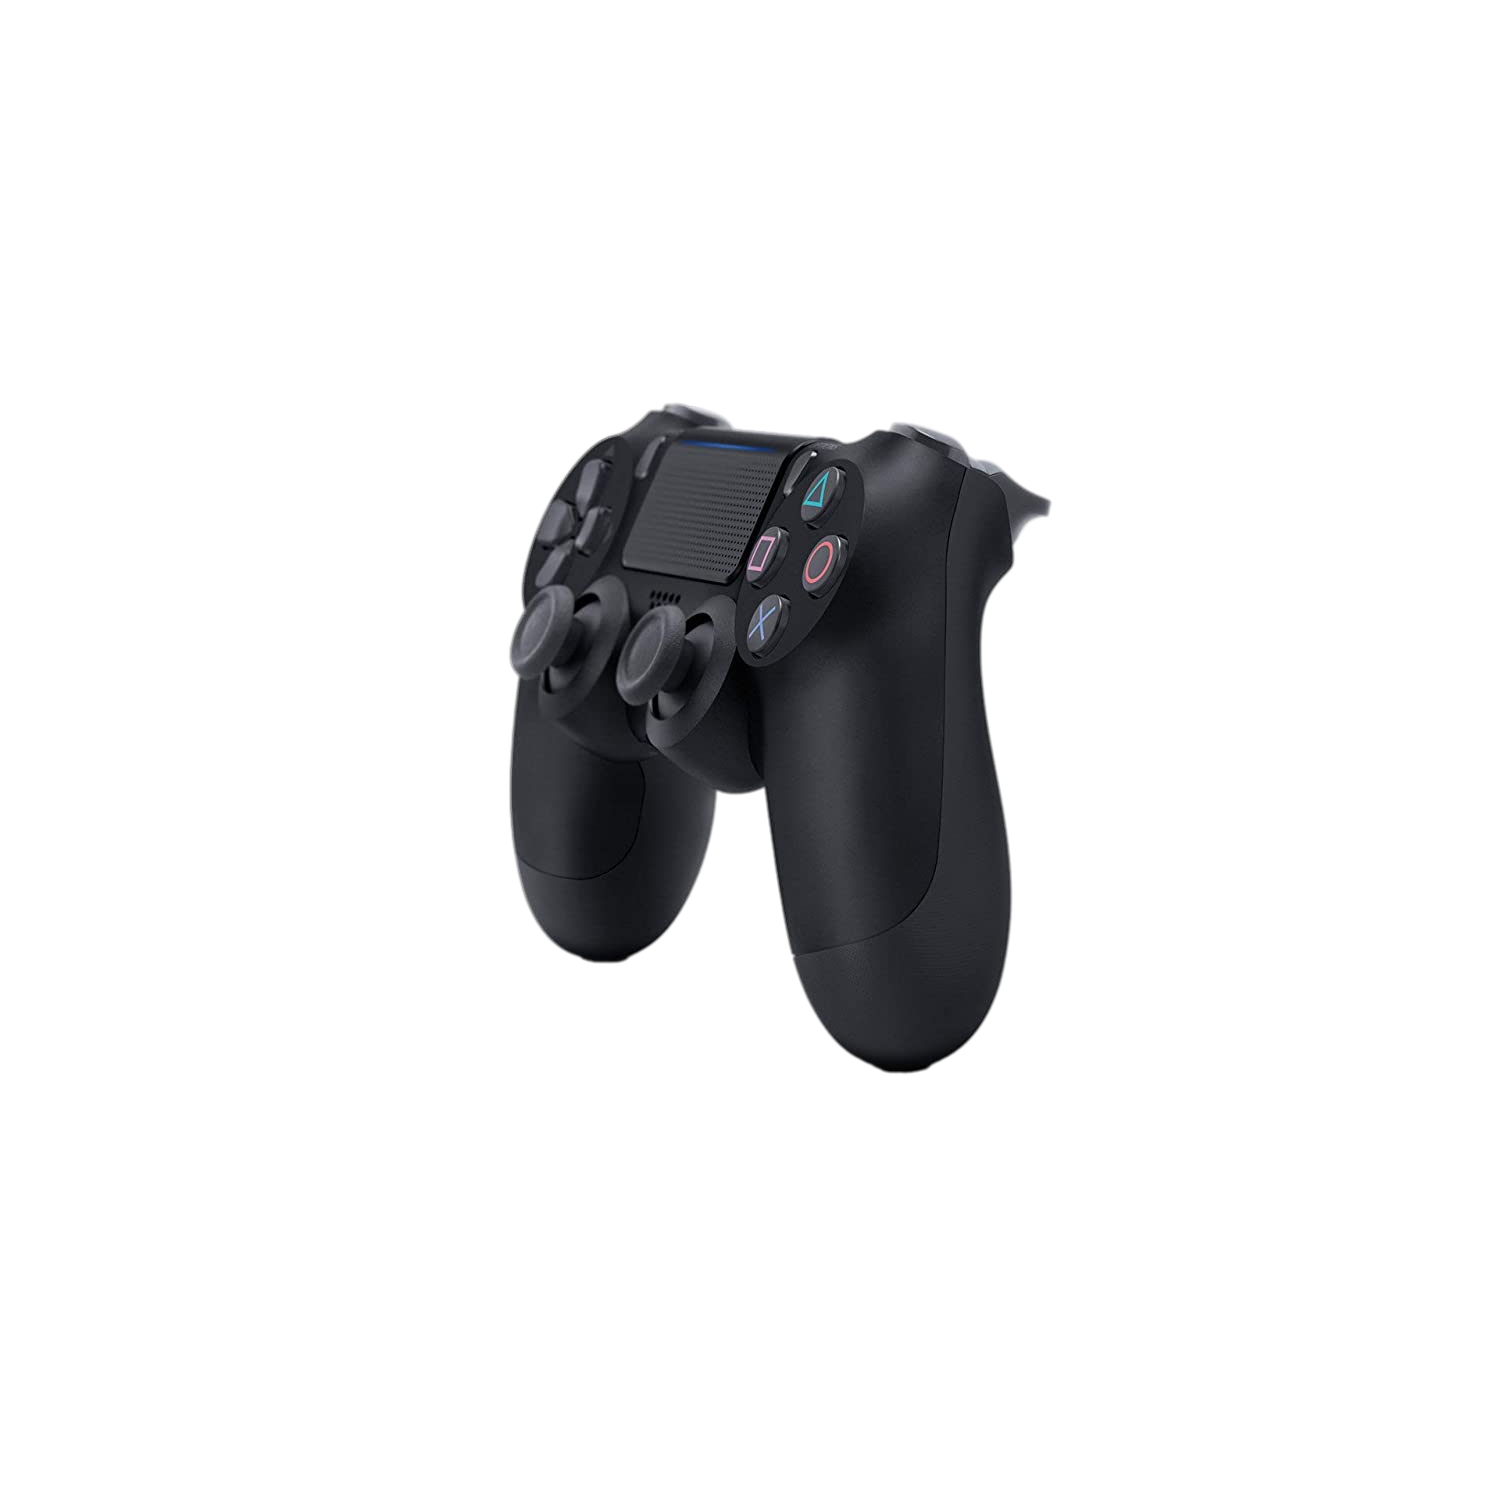 Sony-Official-PlayStation-DualShock-4-Controller-Black-3